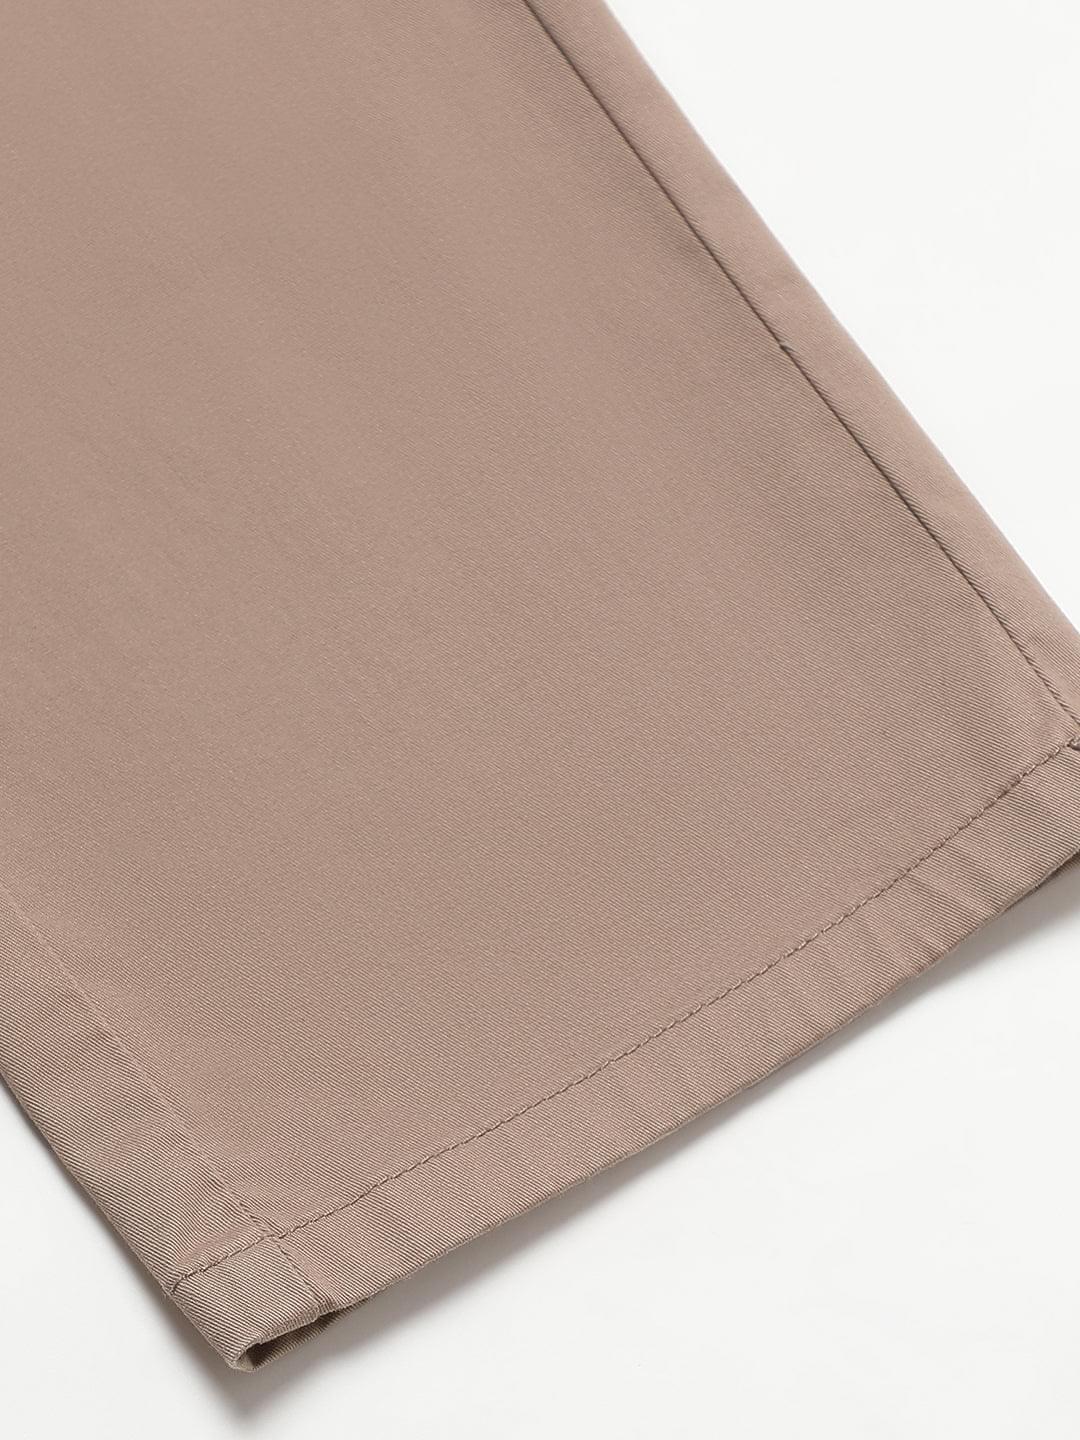 2 Way Stretch Pleated Chinos in Khaki- Comfort Fit